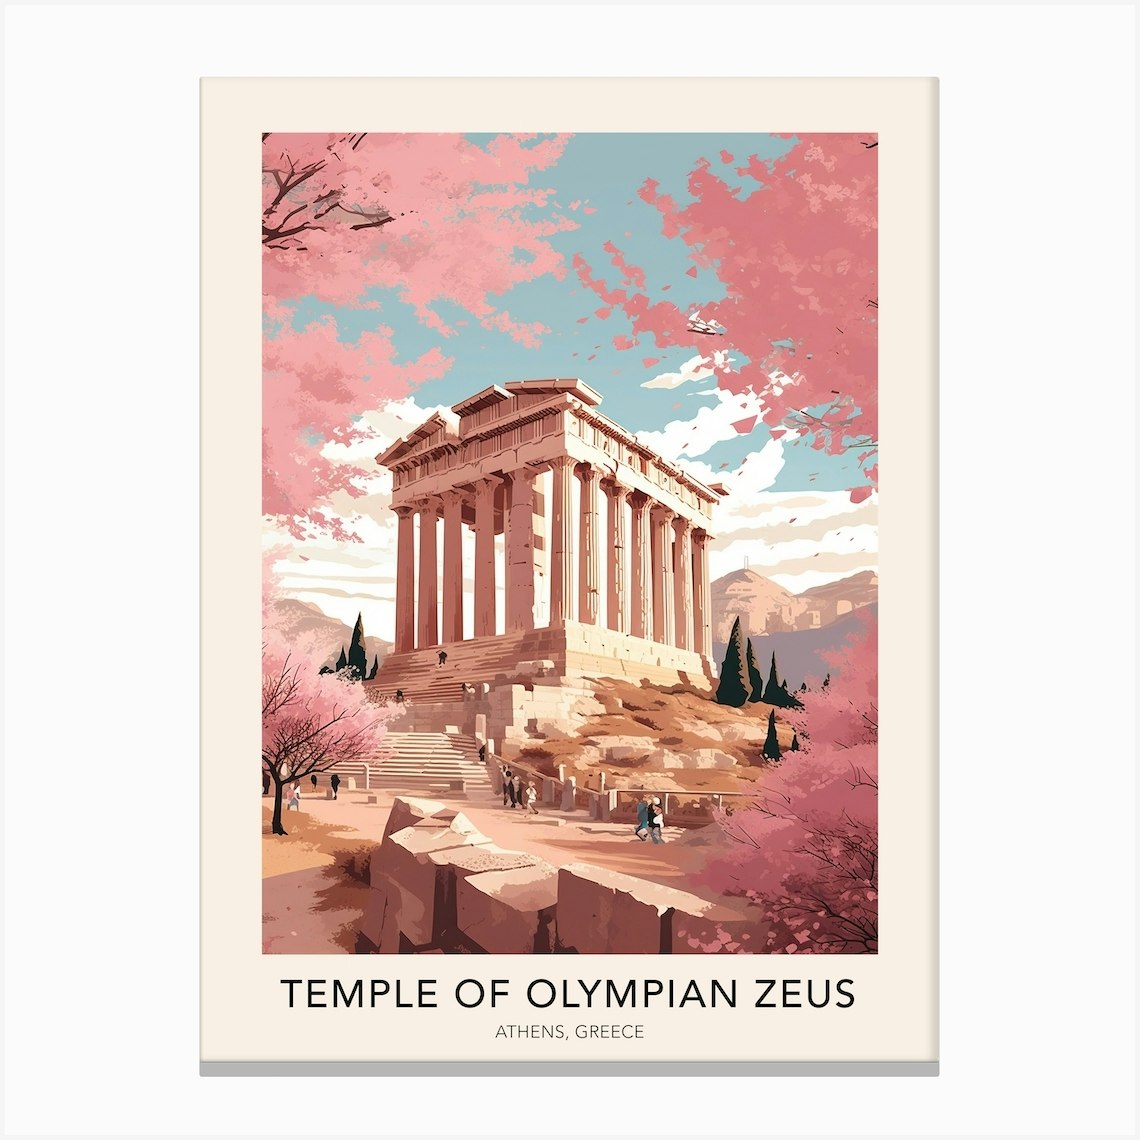 Fy Travel Adventure Canvas Poster Olympian Of Greece Athens Art The Print of Zeus Temple The - by